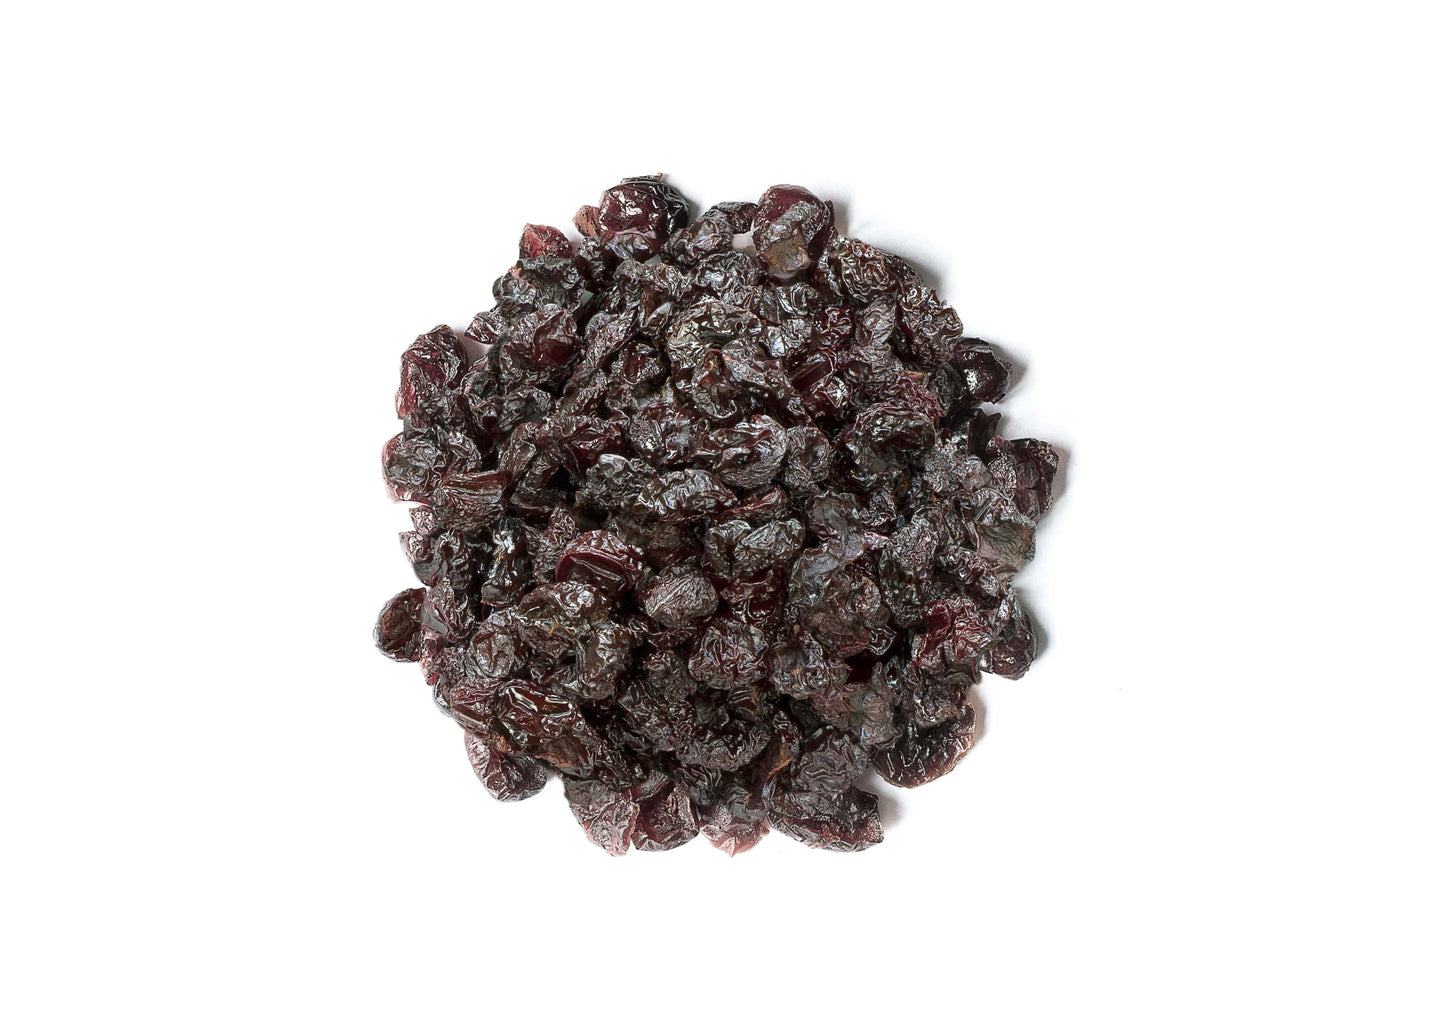 Organic Dried Sour Cherries - Pitted Cherry Fruit, Non-GMO, Raw, Sun-Dried, Unsweetened, Unsulfured, No Oil Added, Vegan, Kosher, Bulk, Prunus Cerasus – by Food to Live